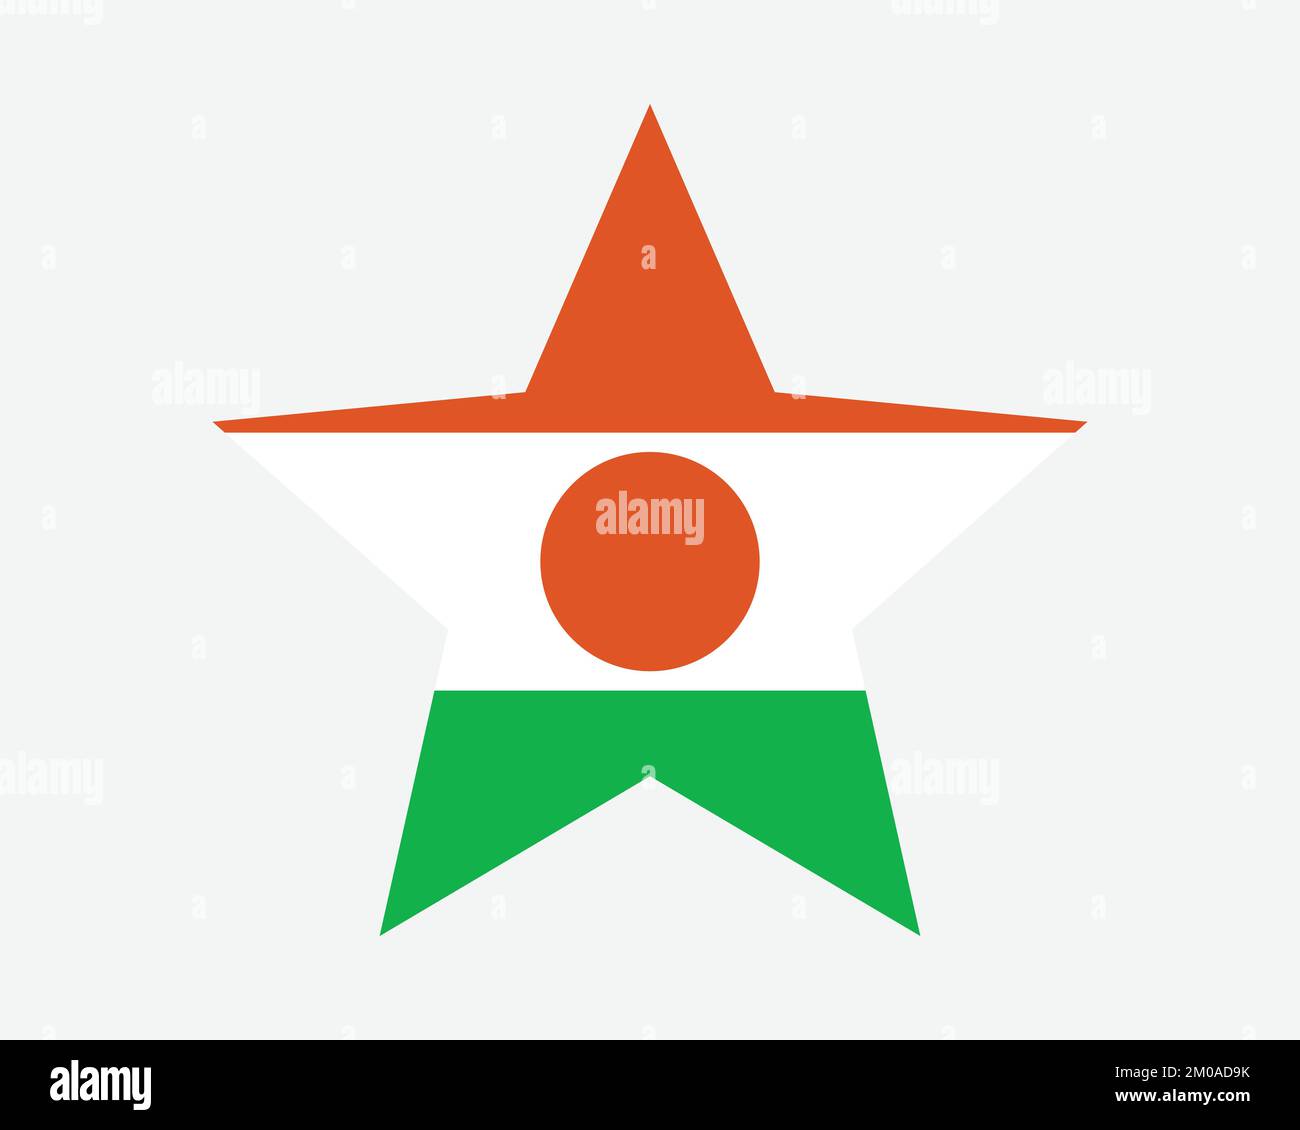 Niger Star Flag. Nigerien Star Shape Flag. Republic of the Niger Country National Banner Icon Symbol Vector Flat Artwork Graphic Illustration Stock Vector